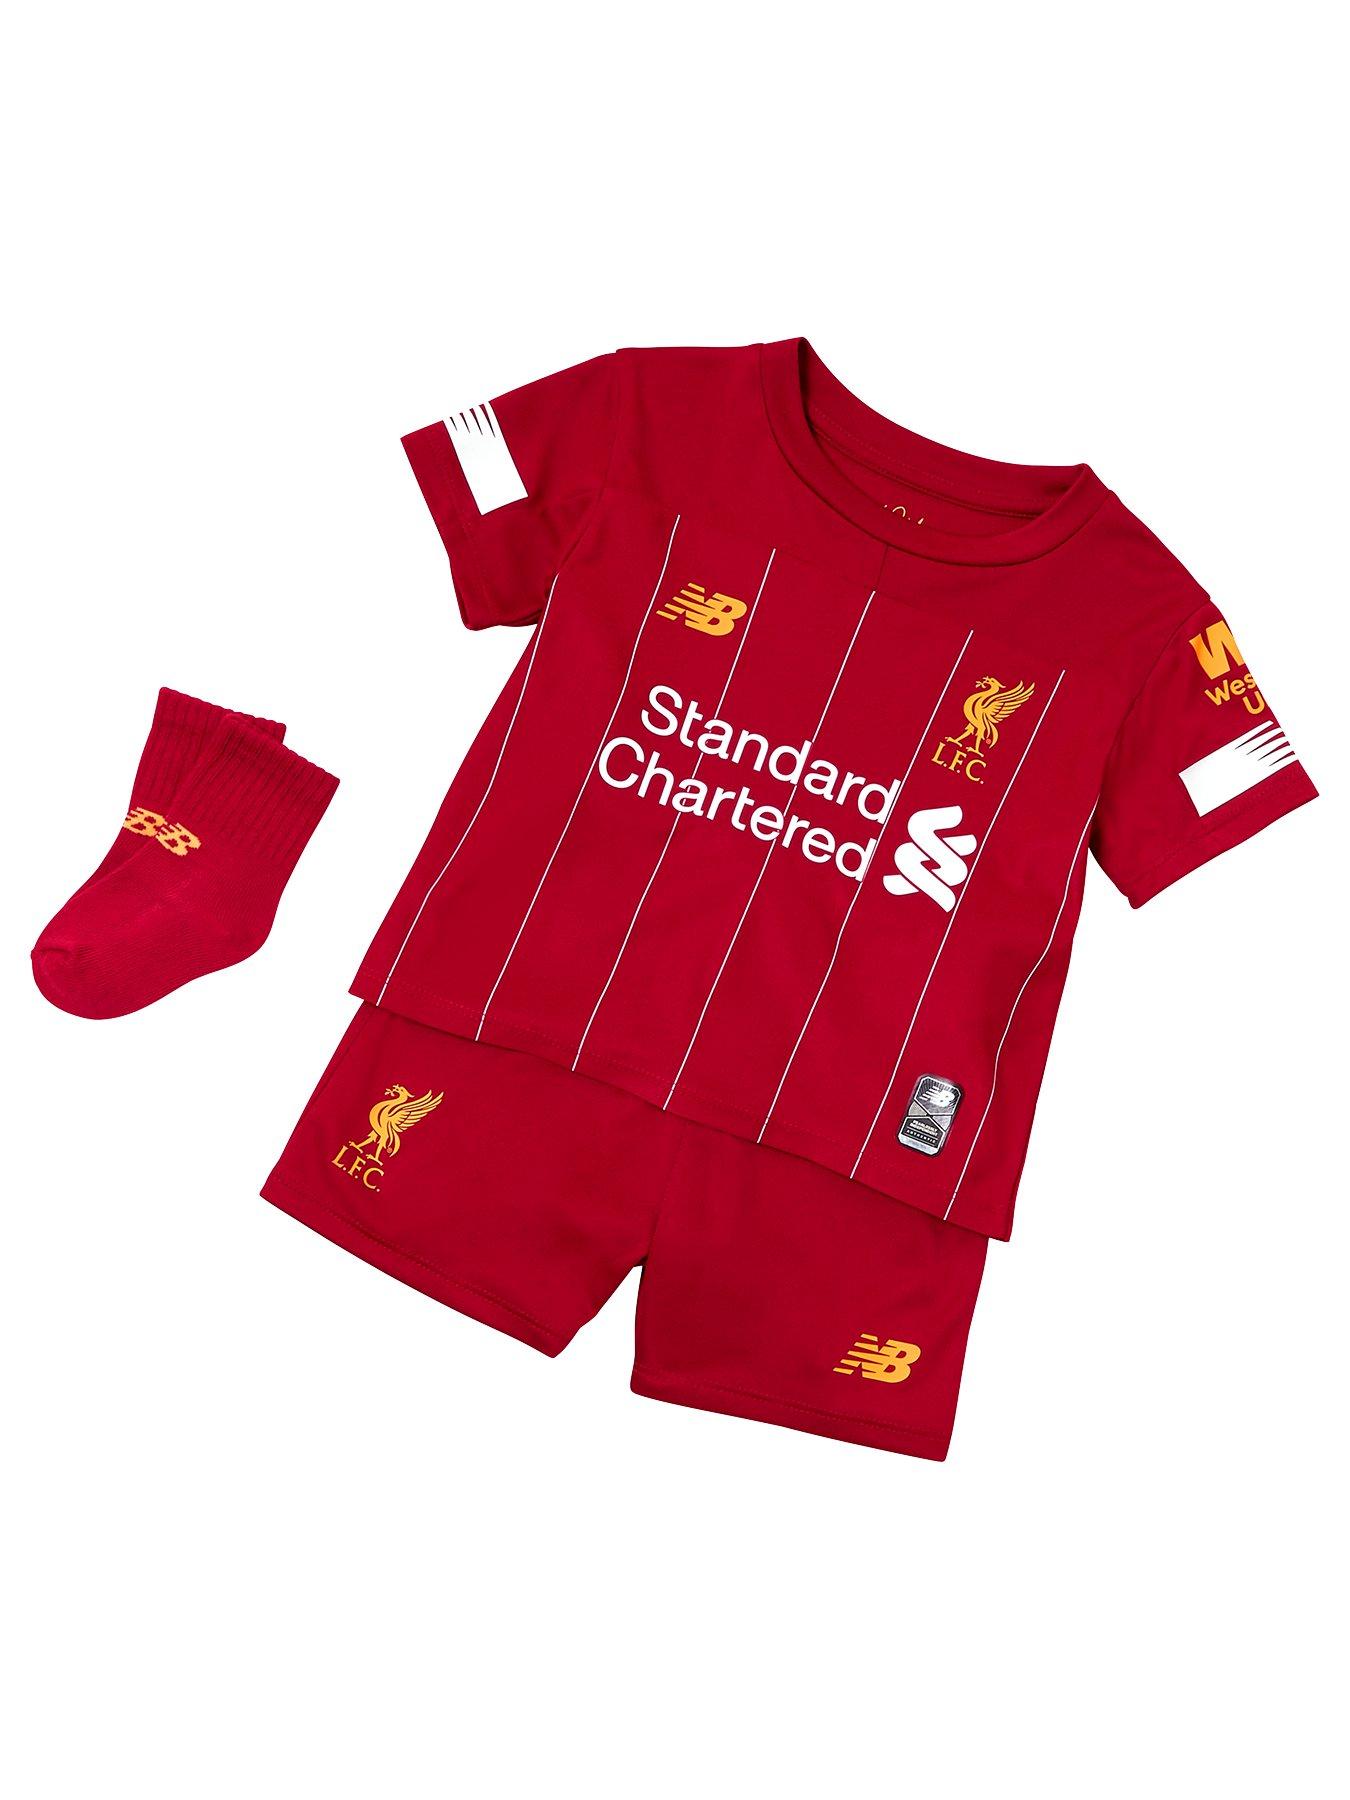 Roblox And Liverpool Football Club Team Up For A Limited Tomwhite2010 Com - liverpool fc scarf roblox code give me a robux code